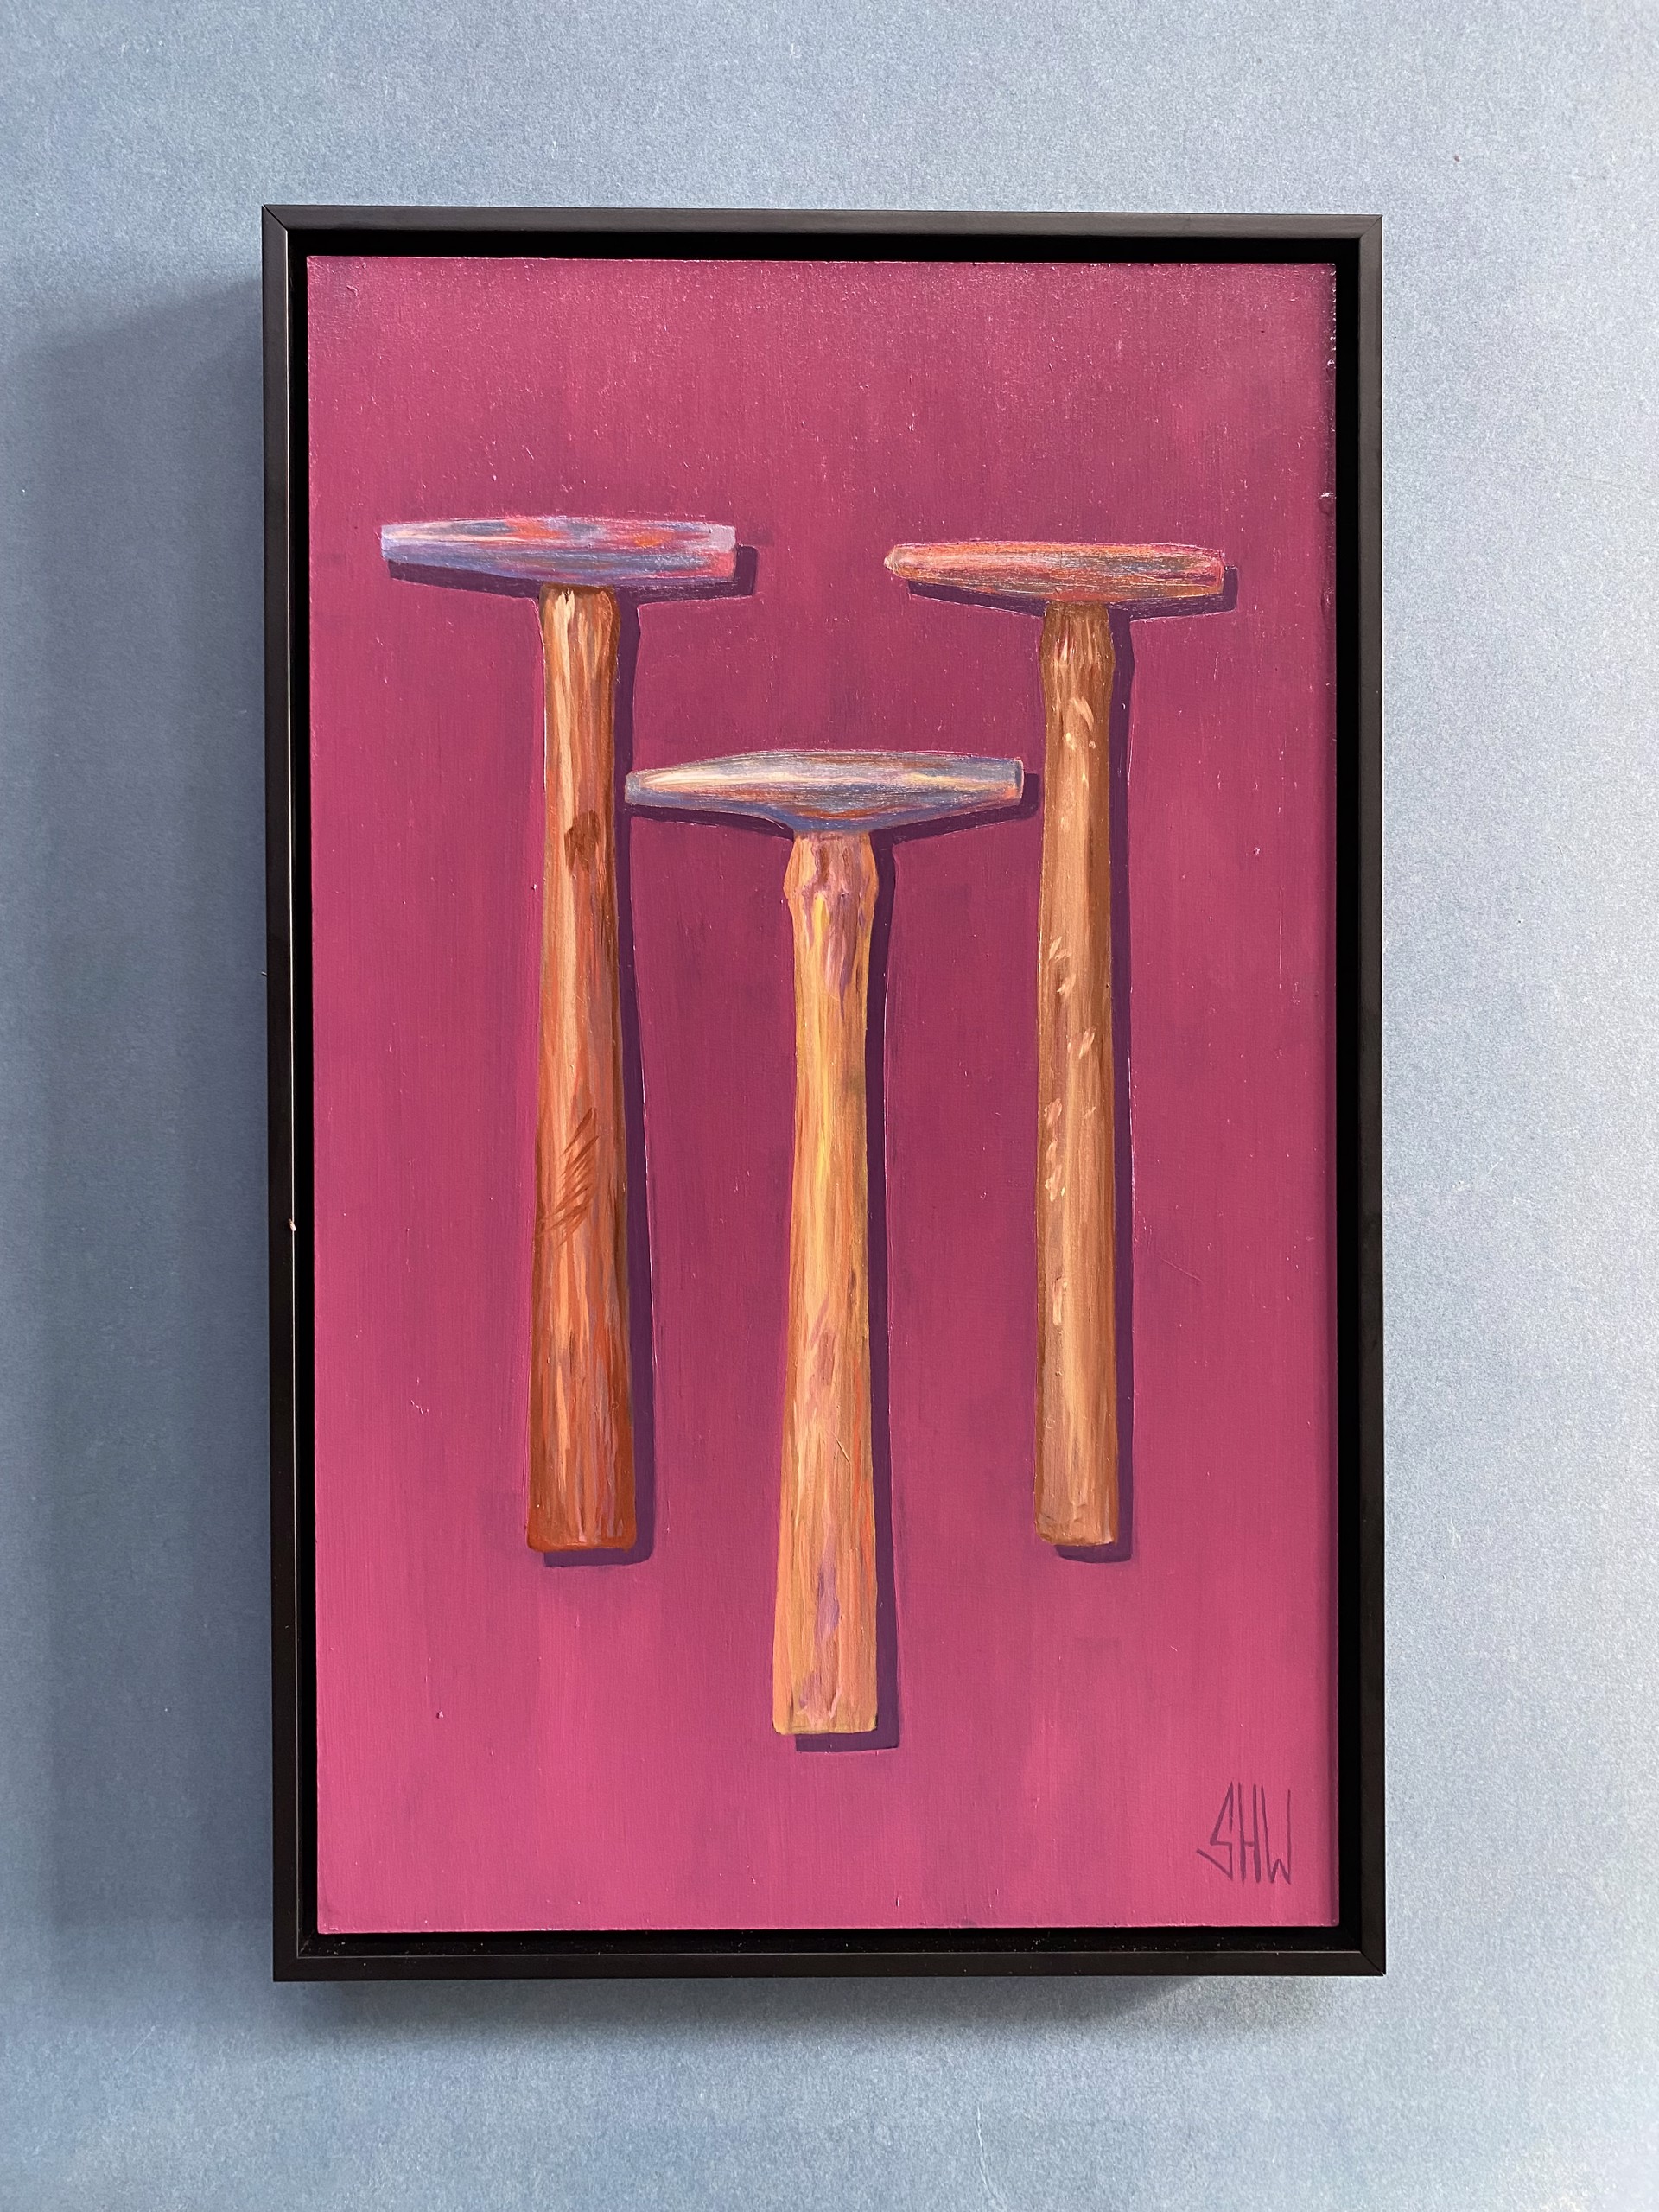 Tool No. 21 (Tack Hammers) by Stephen Wells